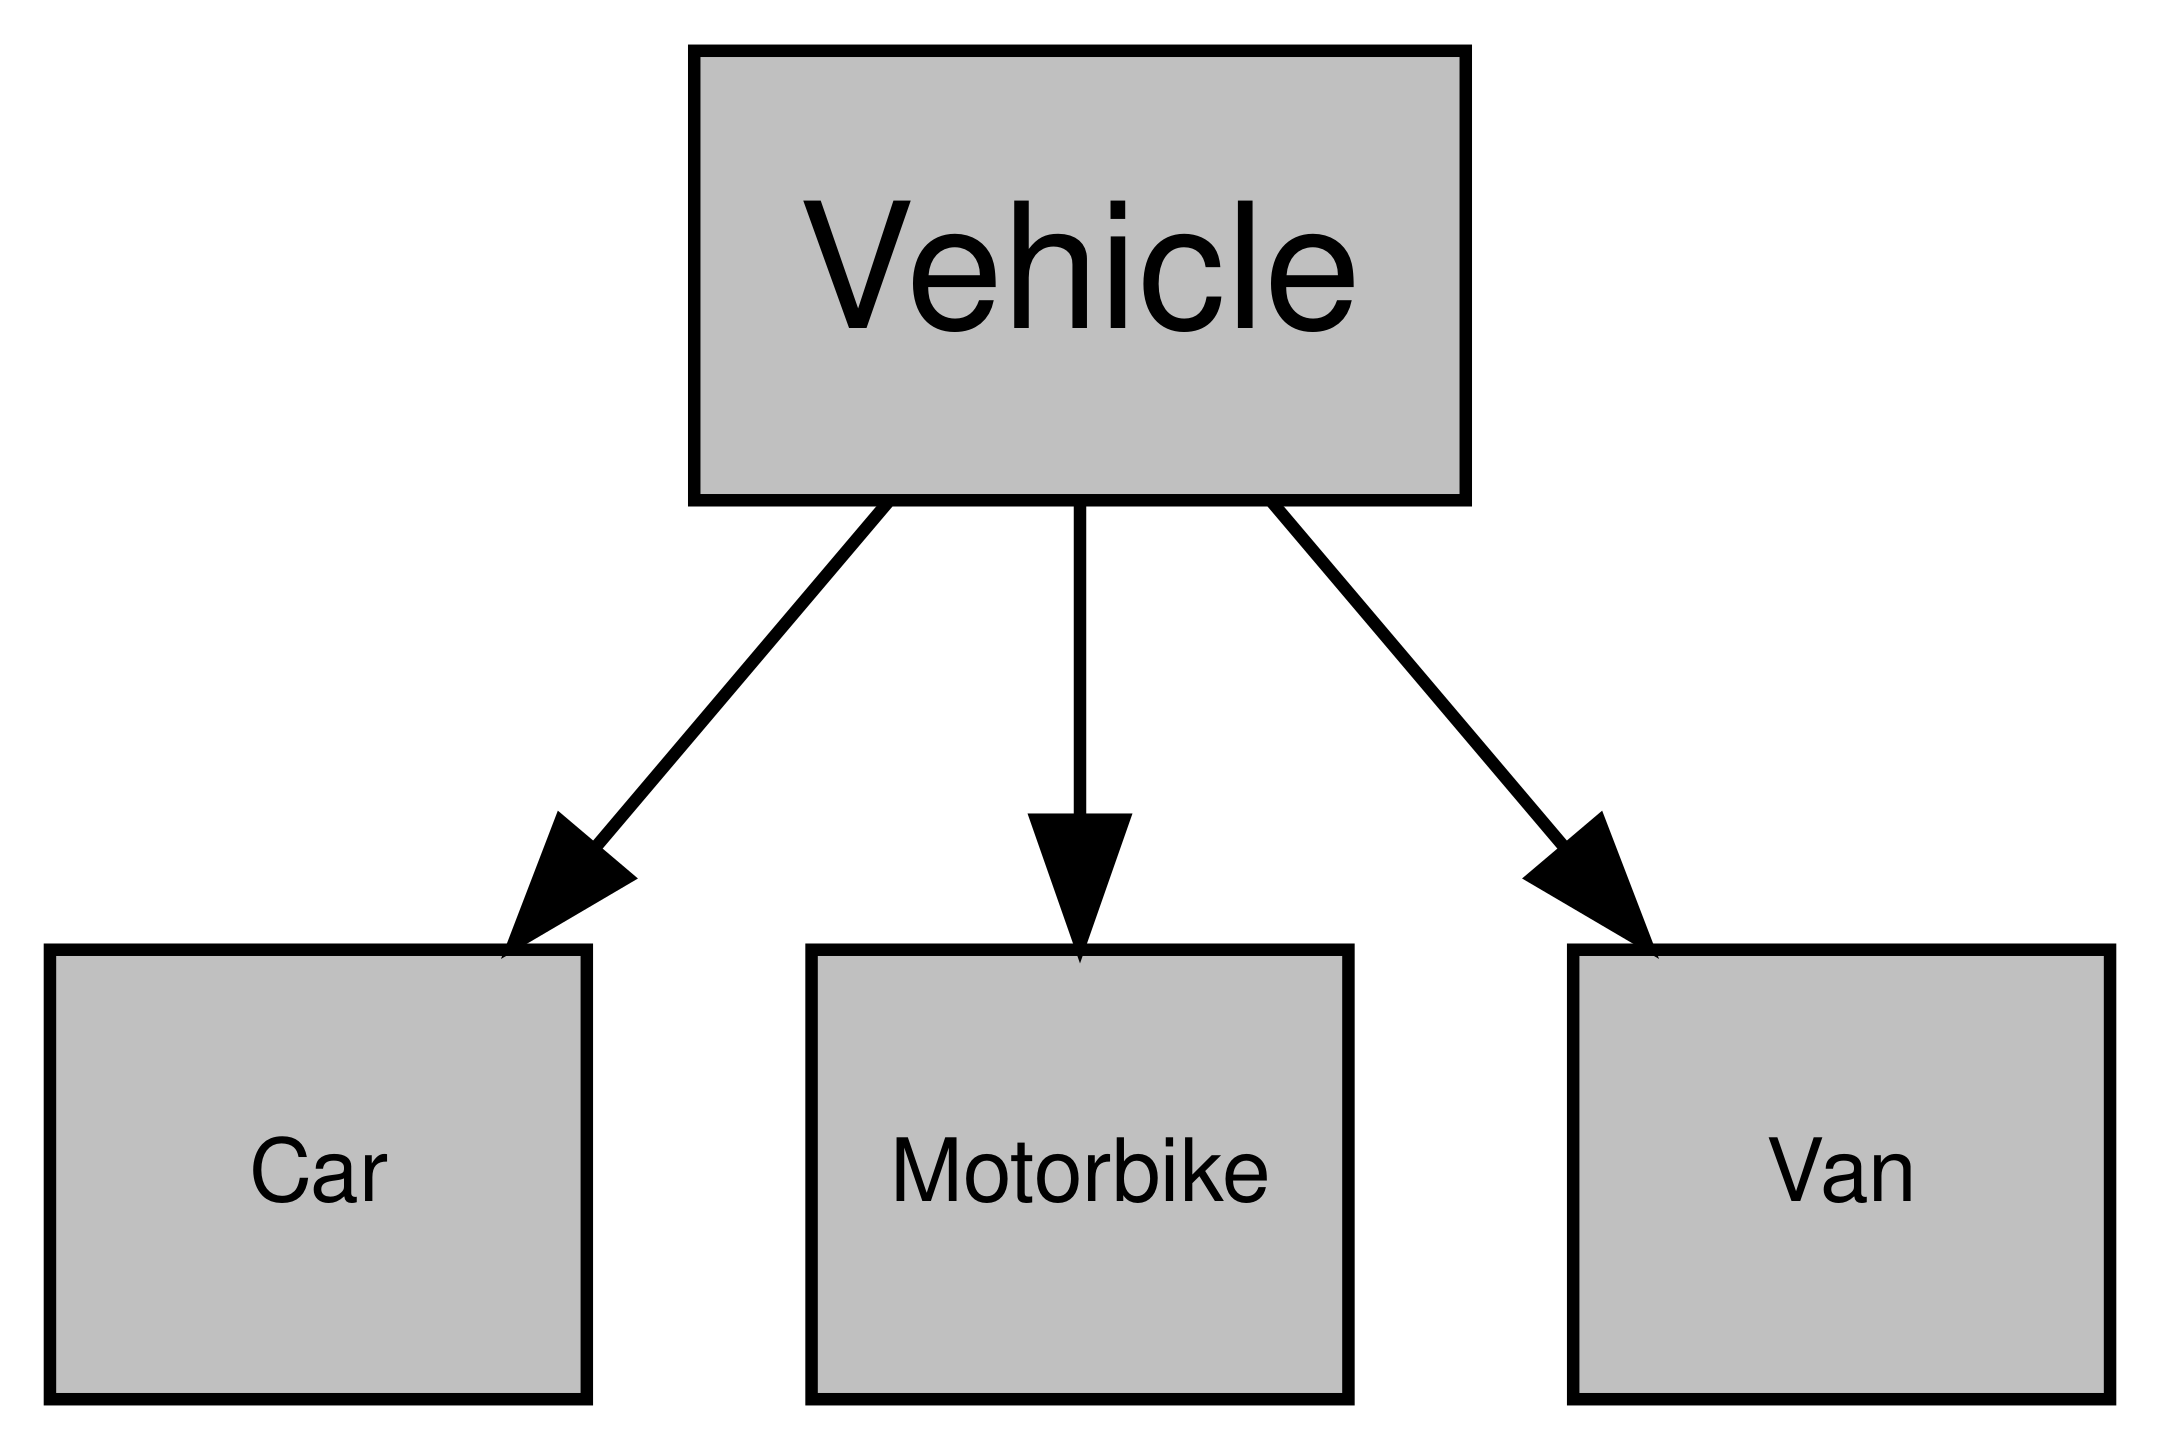 Example of inheritance using cars